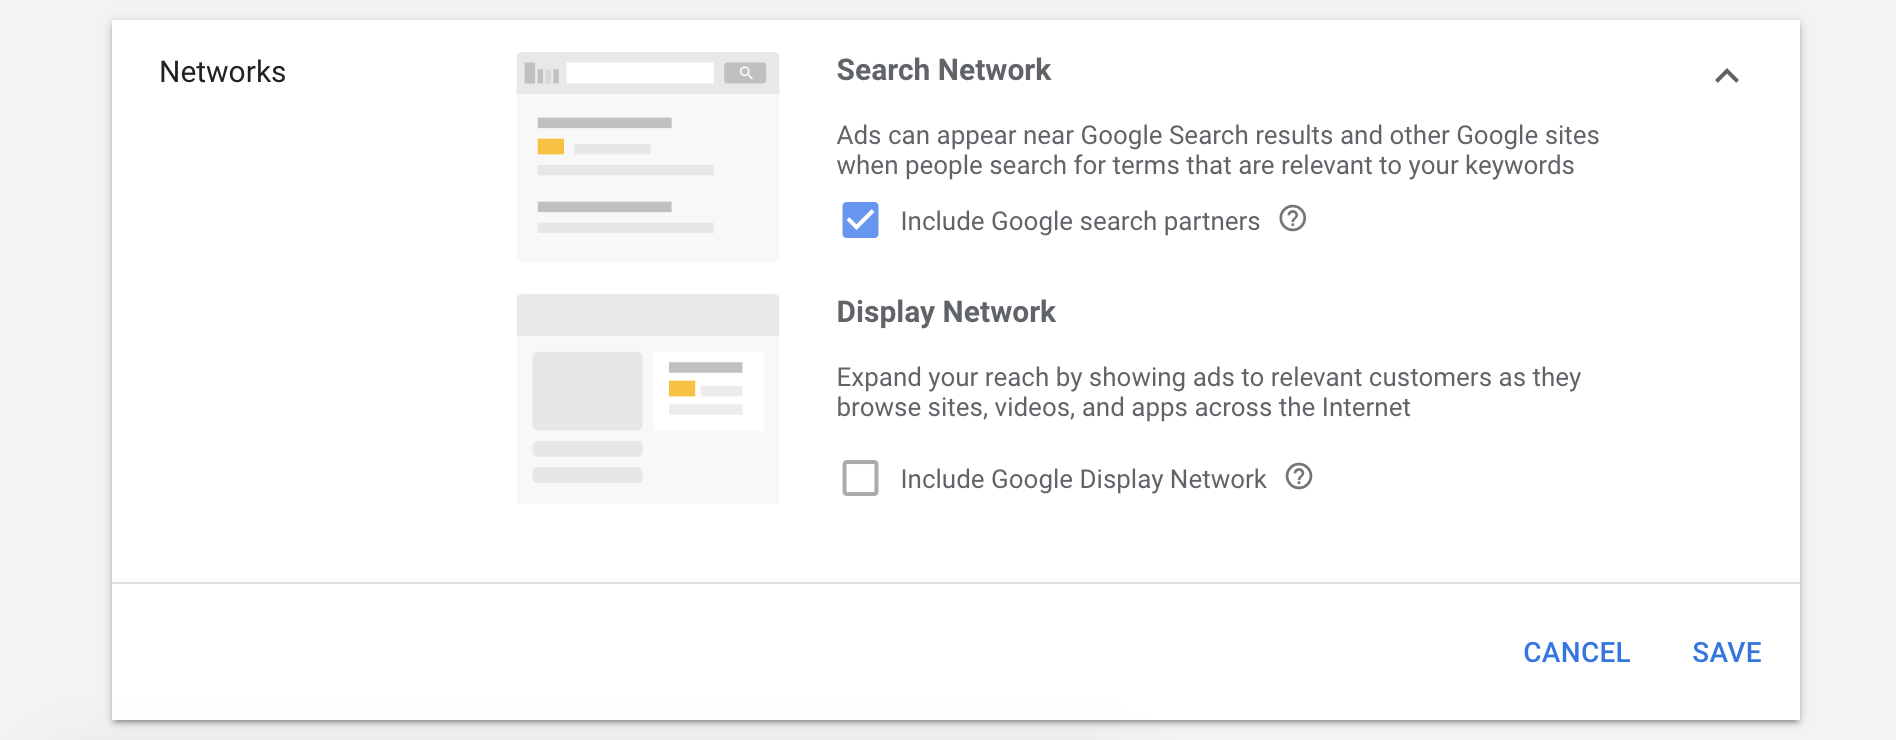 Networks in Google Ads campaign settings